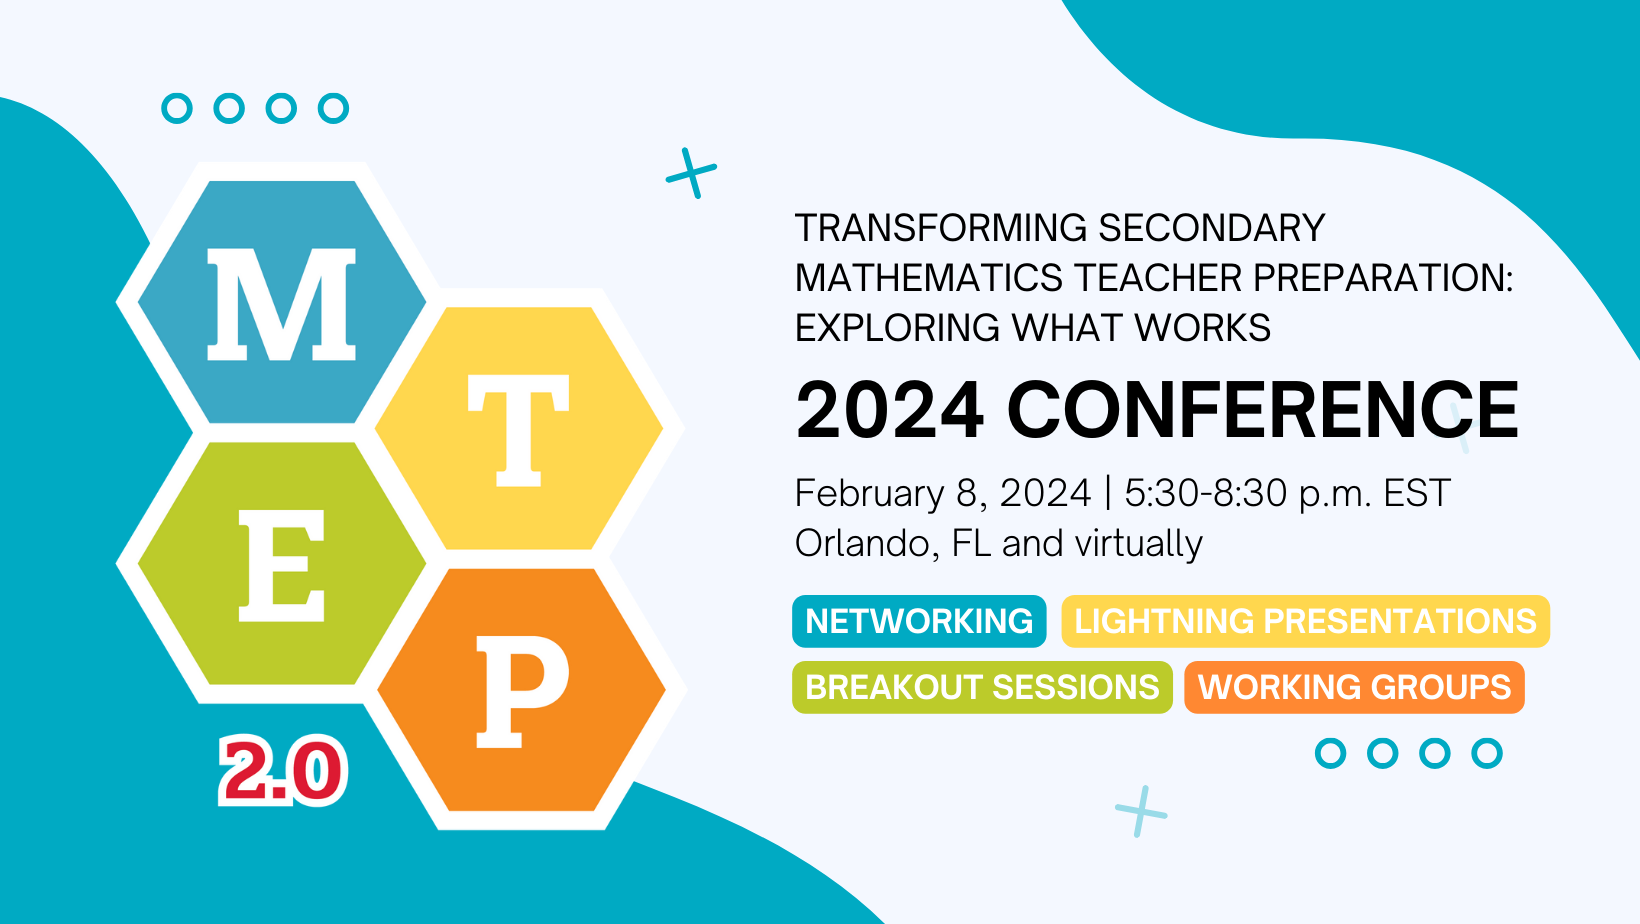 The 2024 MTEP 2.0 Conference is Thursday, February 8, from 5:30-8:30 p.m. EST.